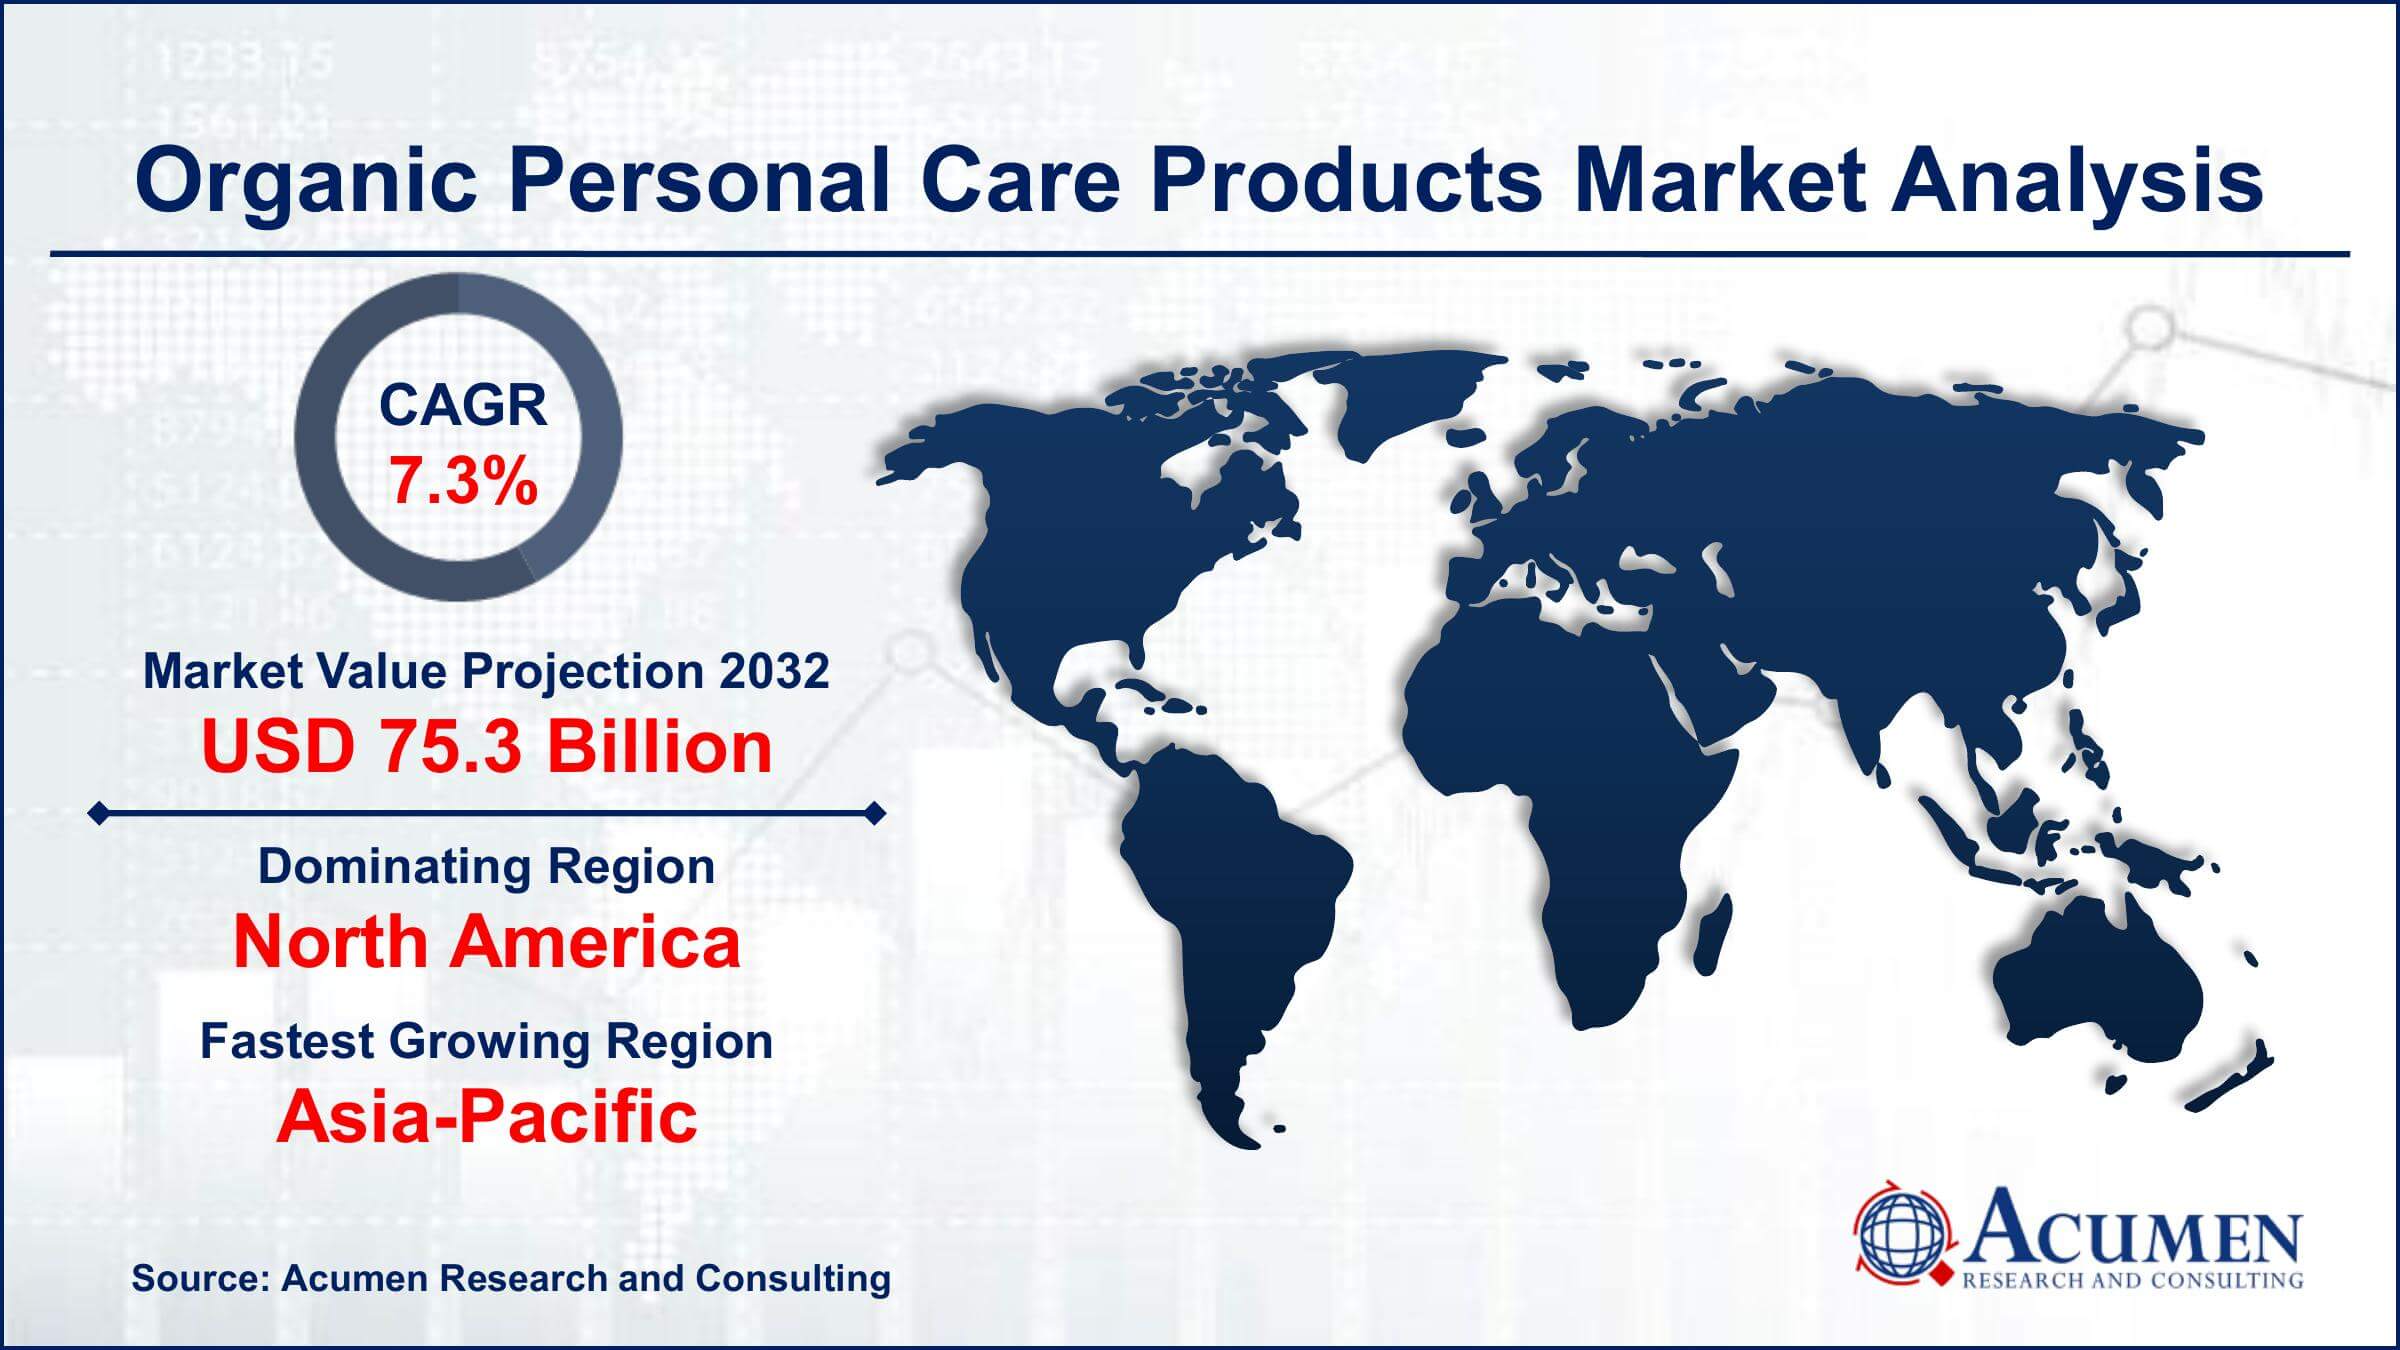 Global Organic Personal Care Products Market Trends